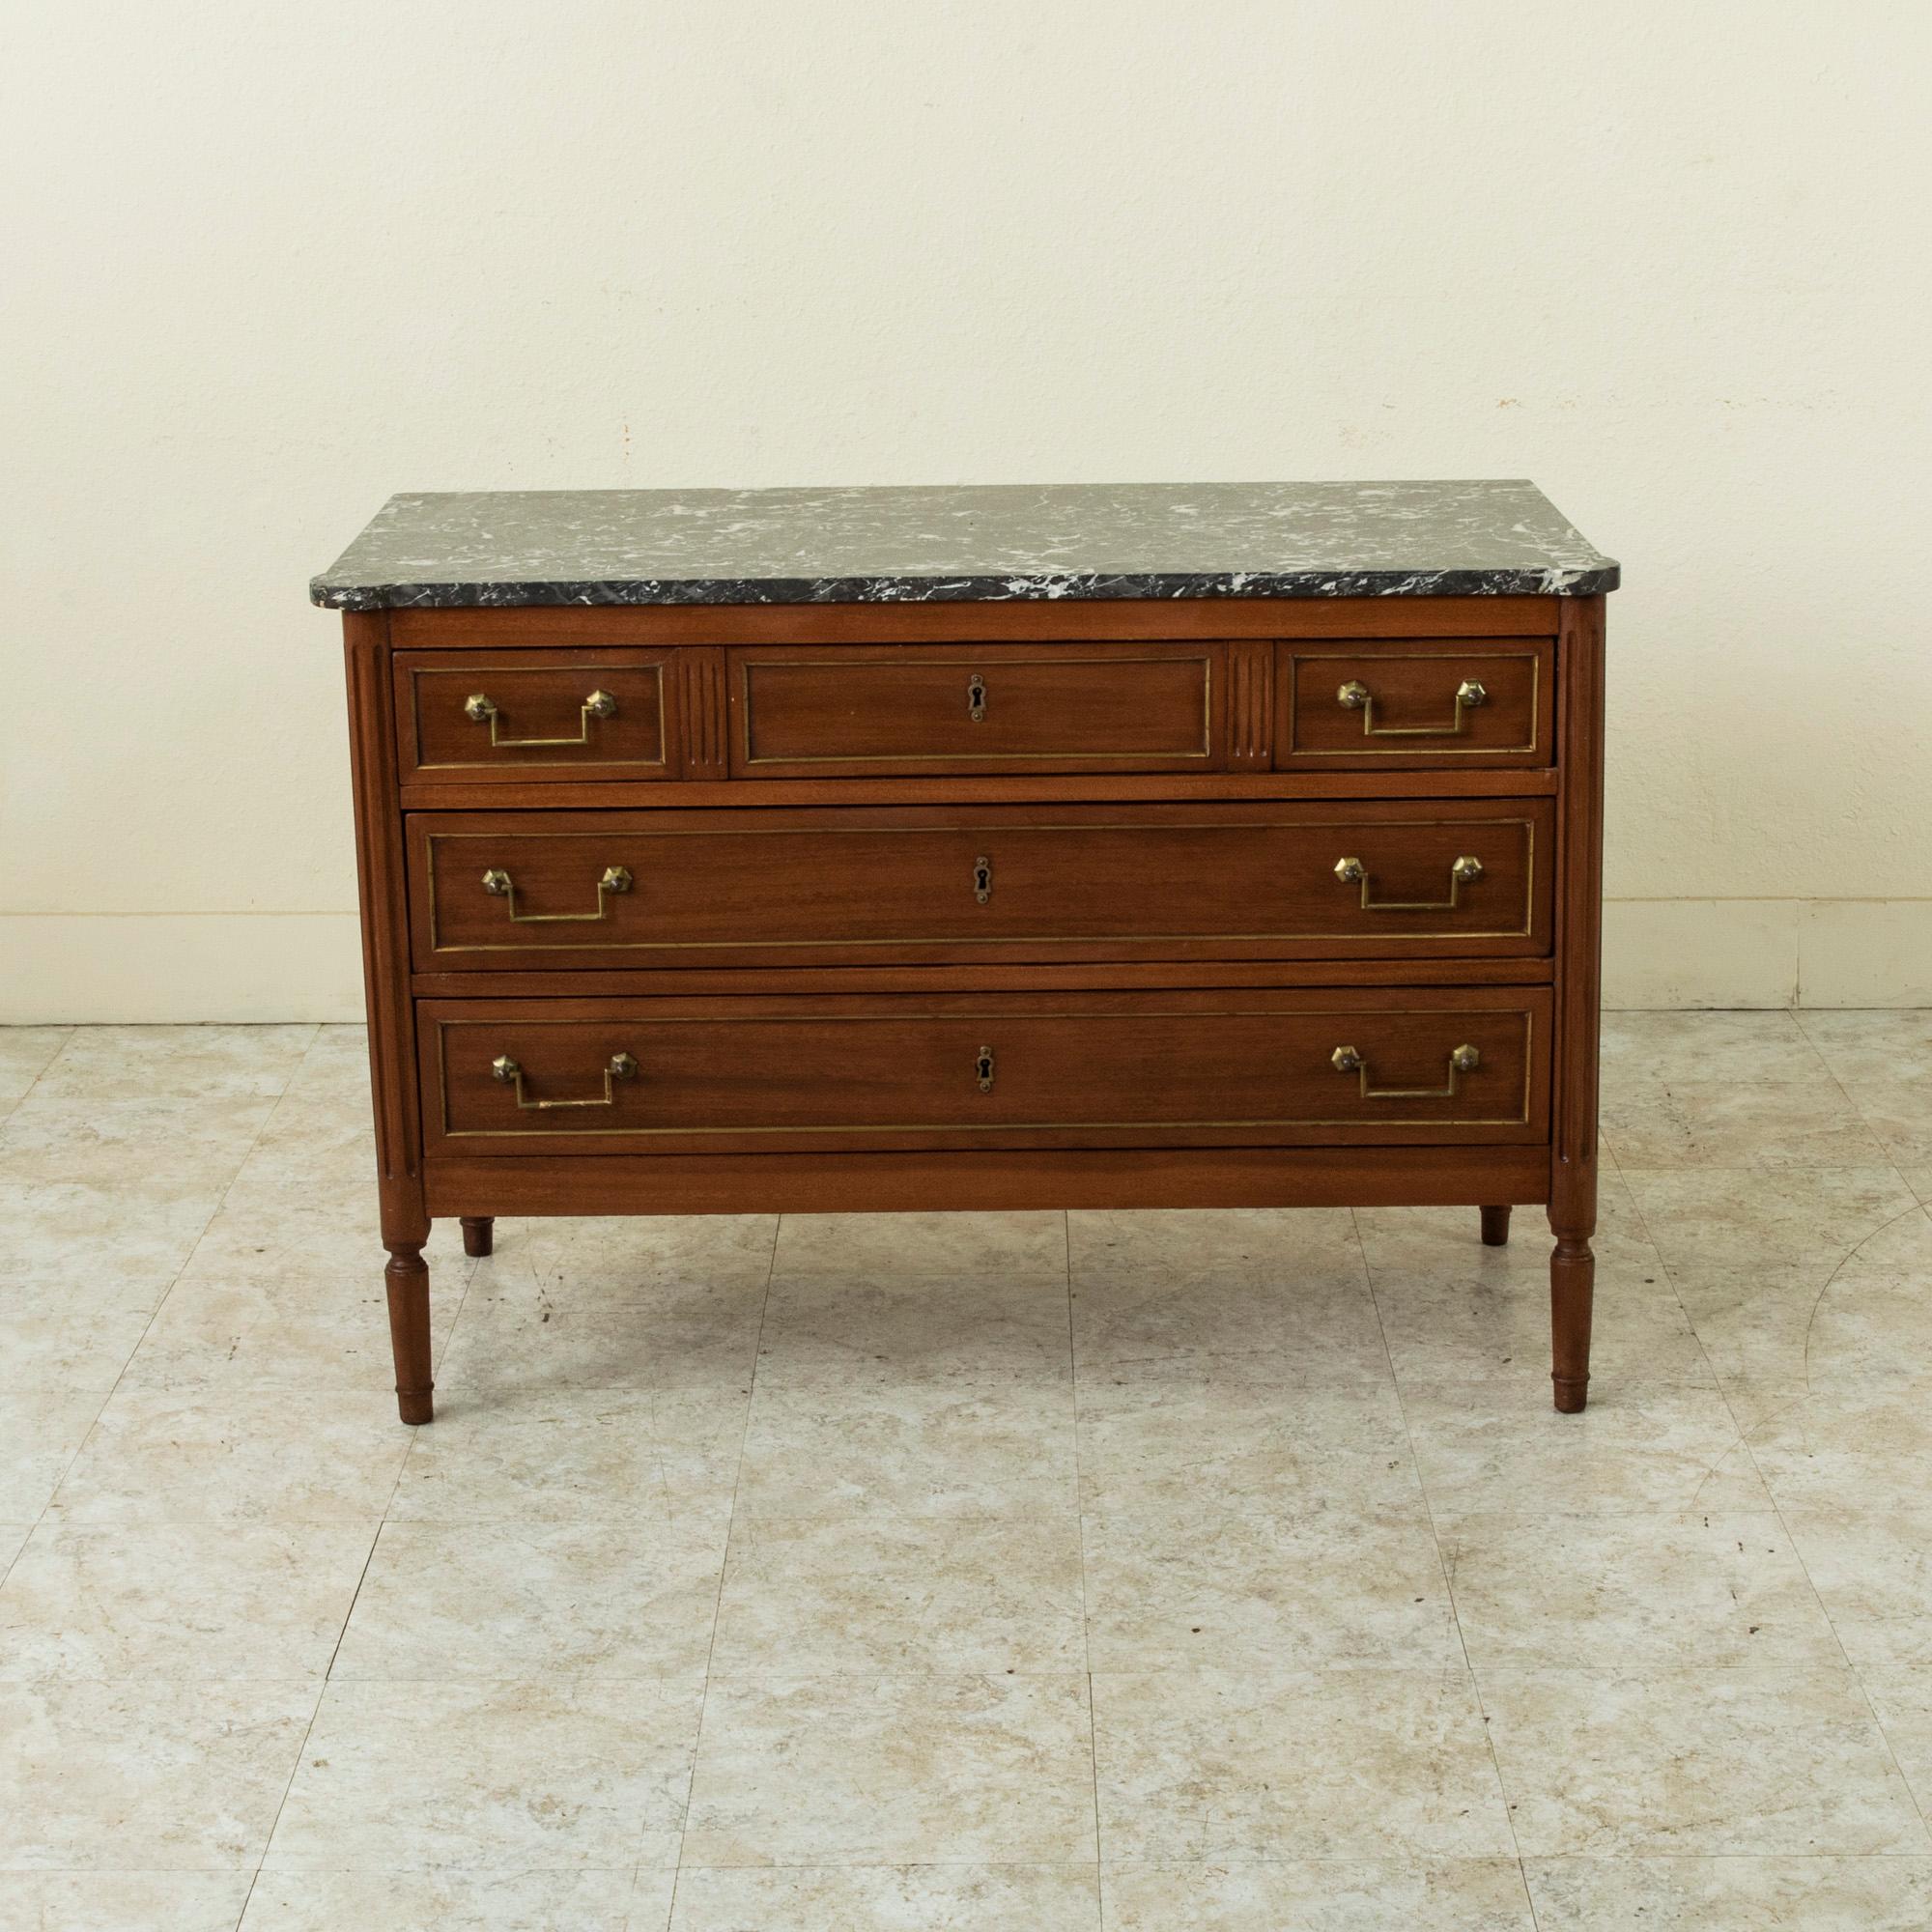 This French Louis XVI style mahogany commode or chest of drawers features a beveled Saint Anne marble top and fluted rounded corners. Its three drawers of dovetail construction are detailed with bronze banding and are fitted with their original